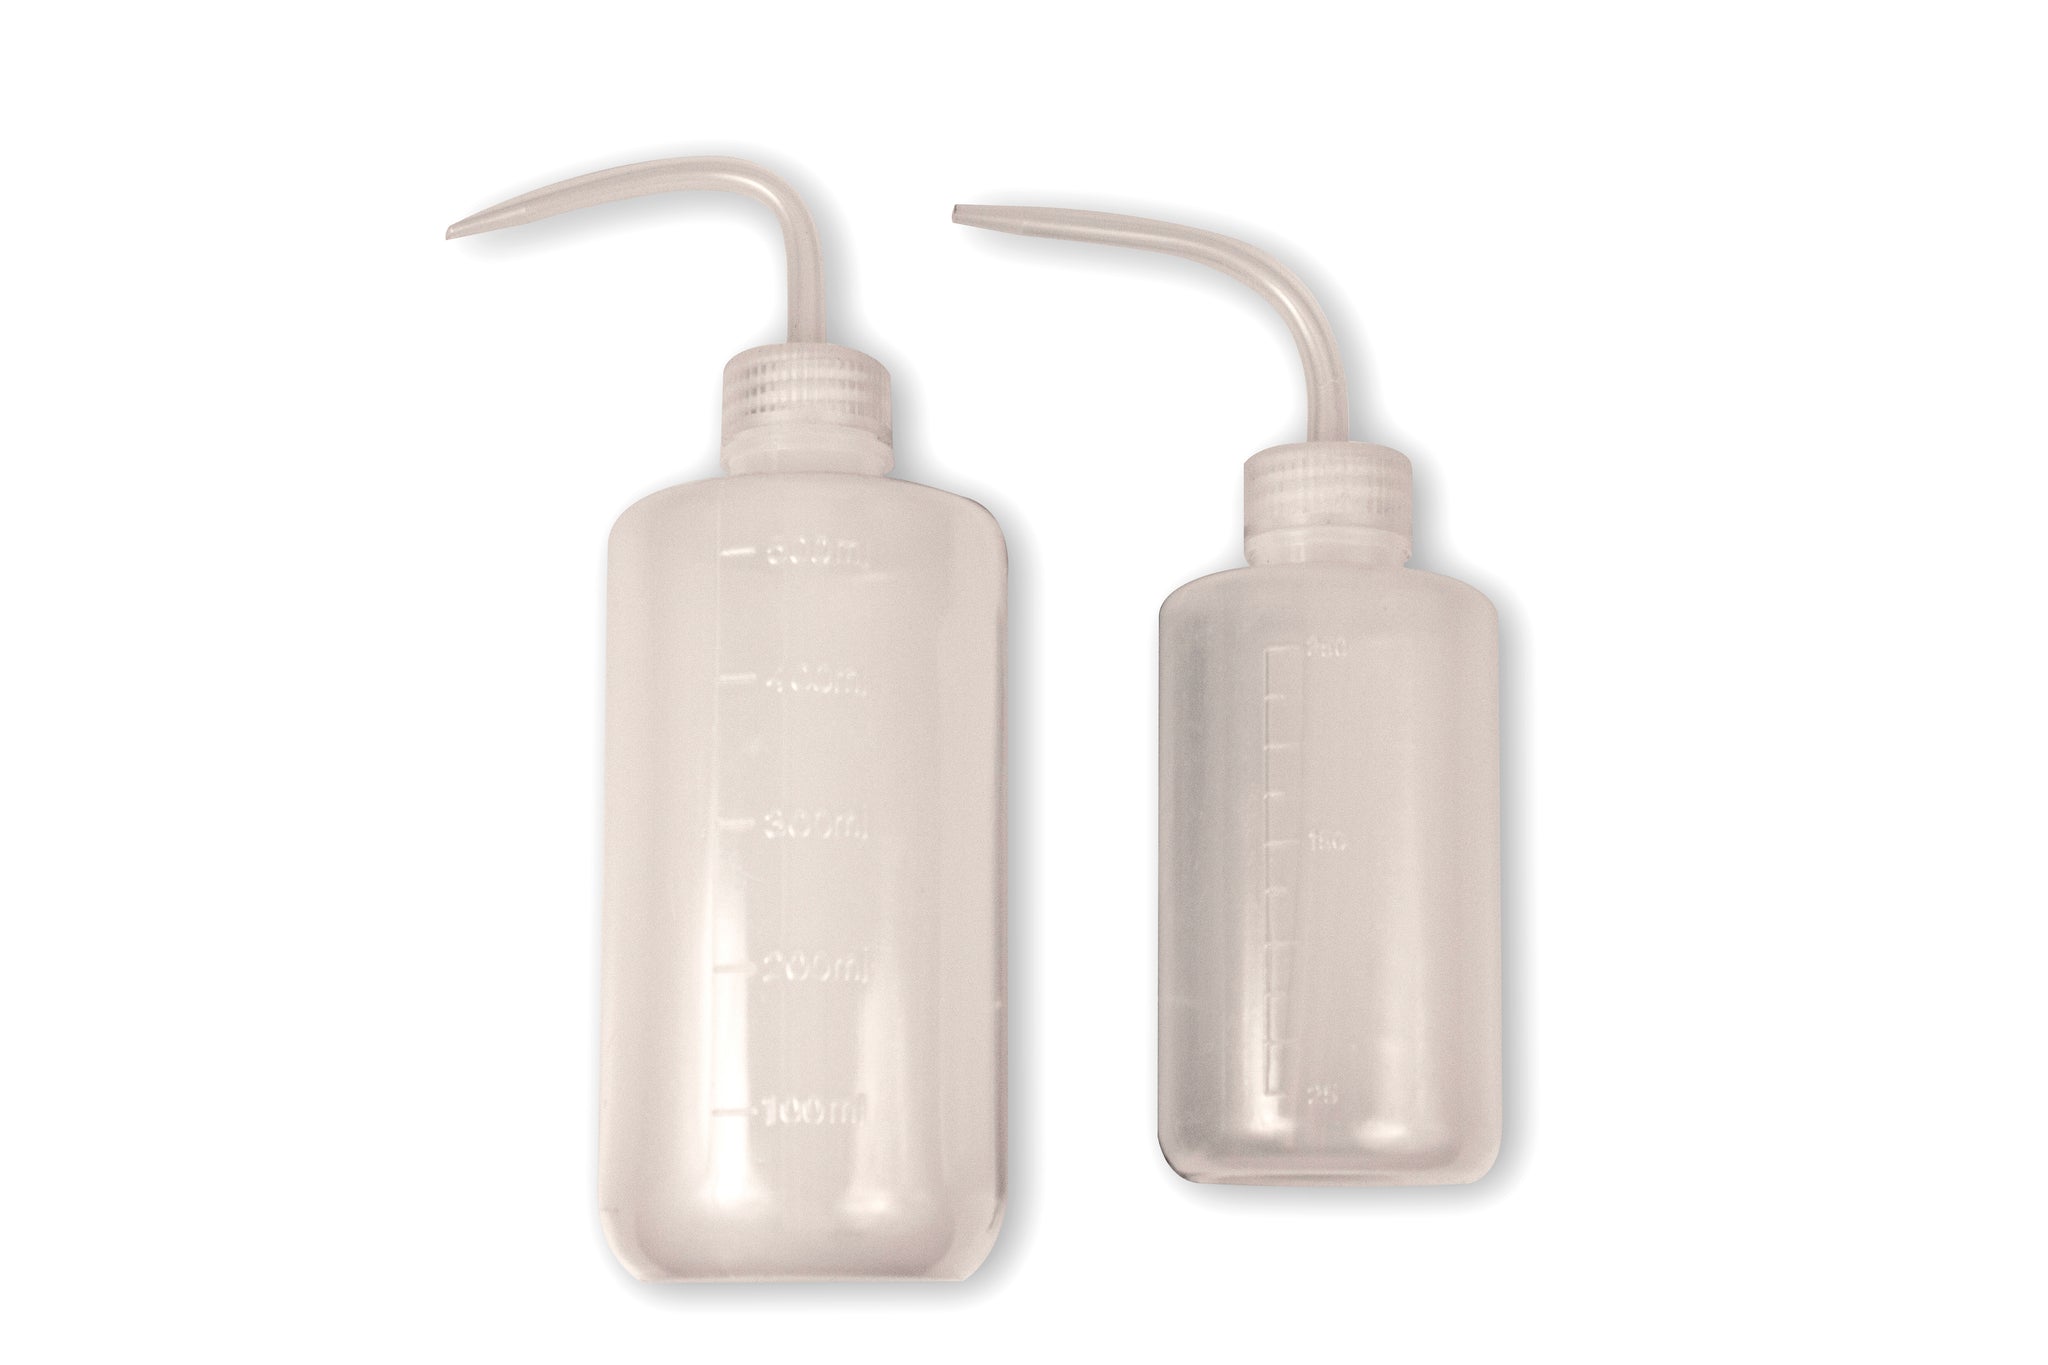 16 Oz Plastic Bottles, Set of 2 Clear Squeeze Bottles With White